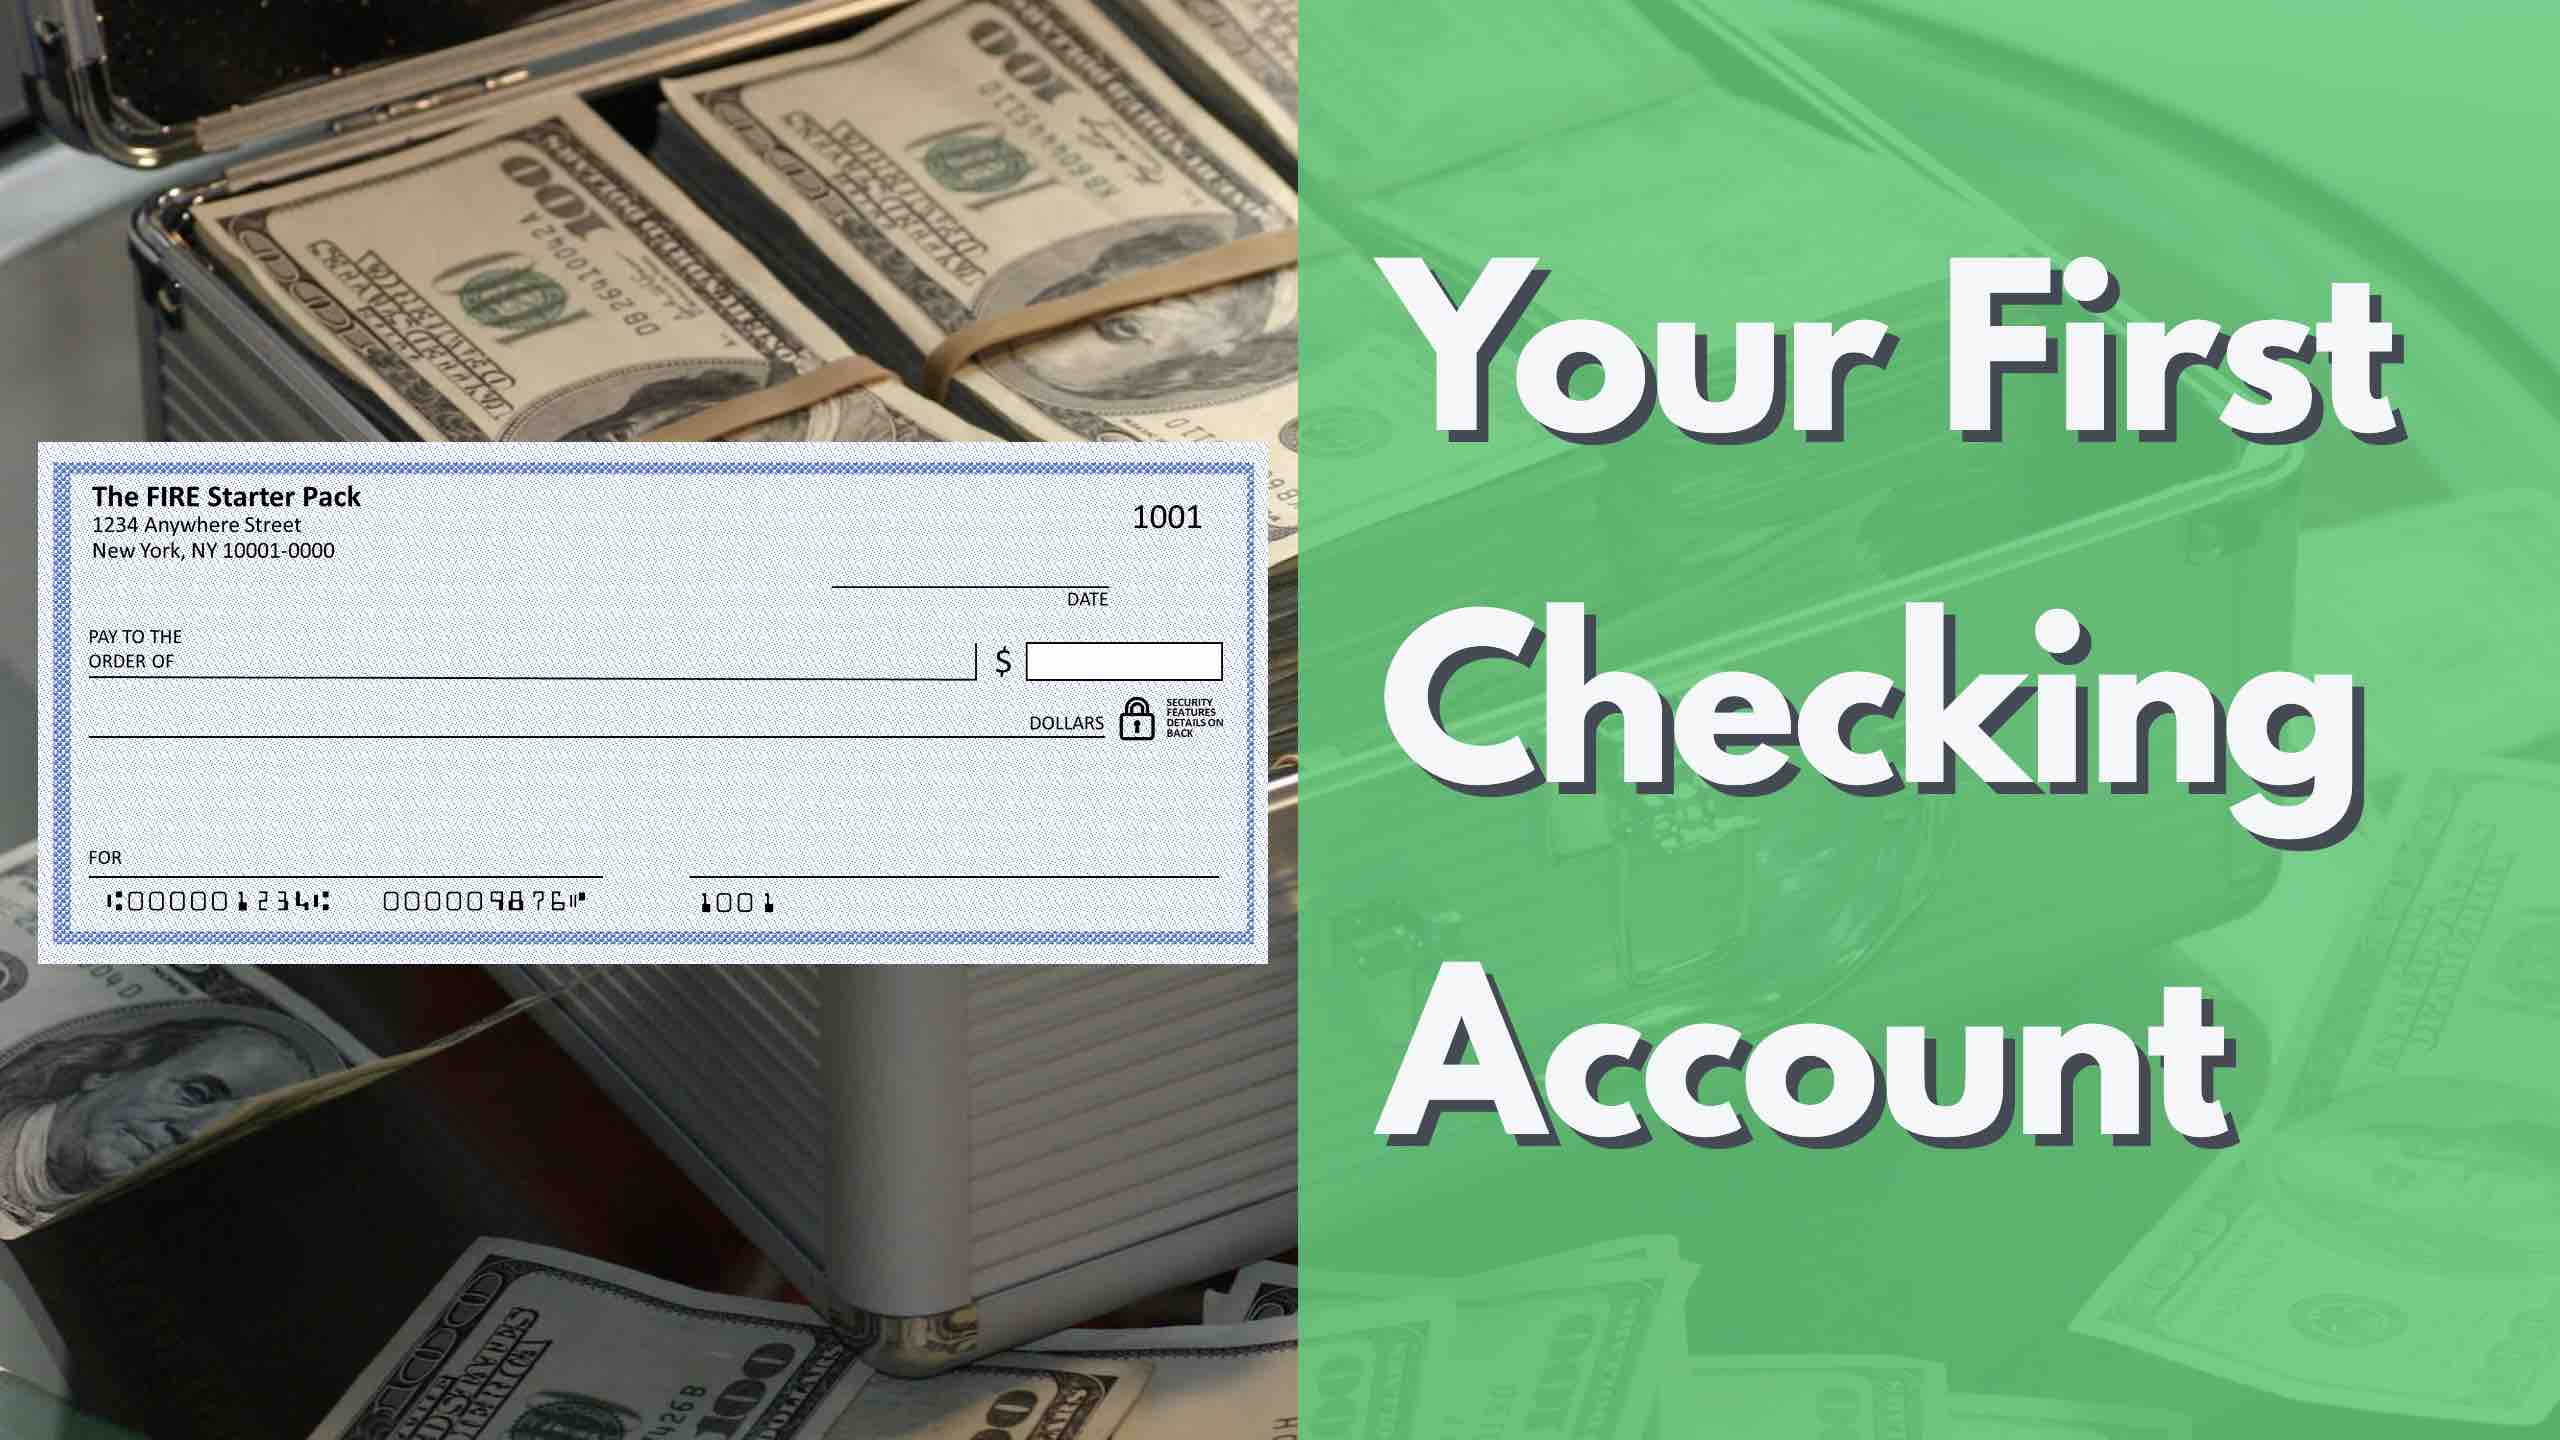 Your first checking account